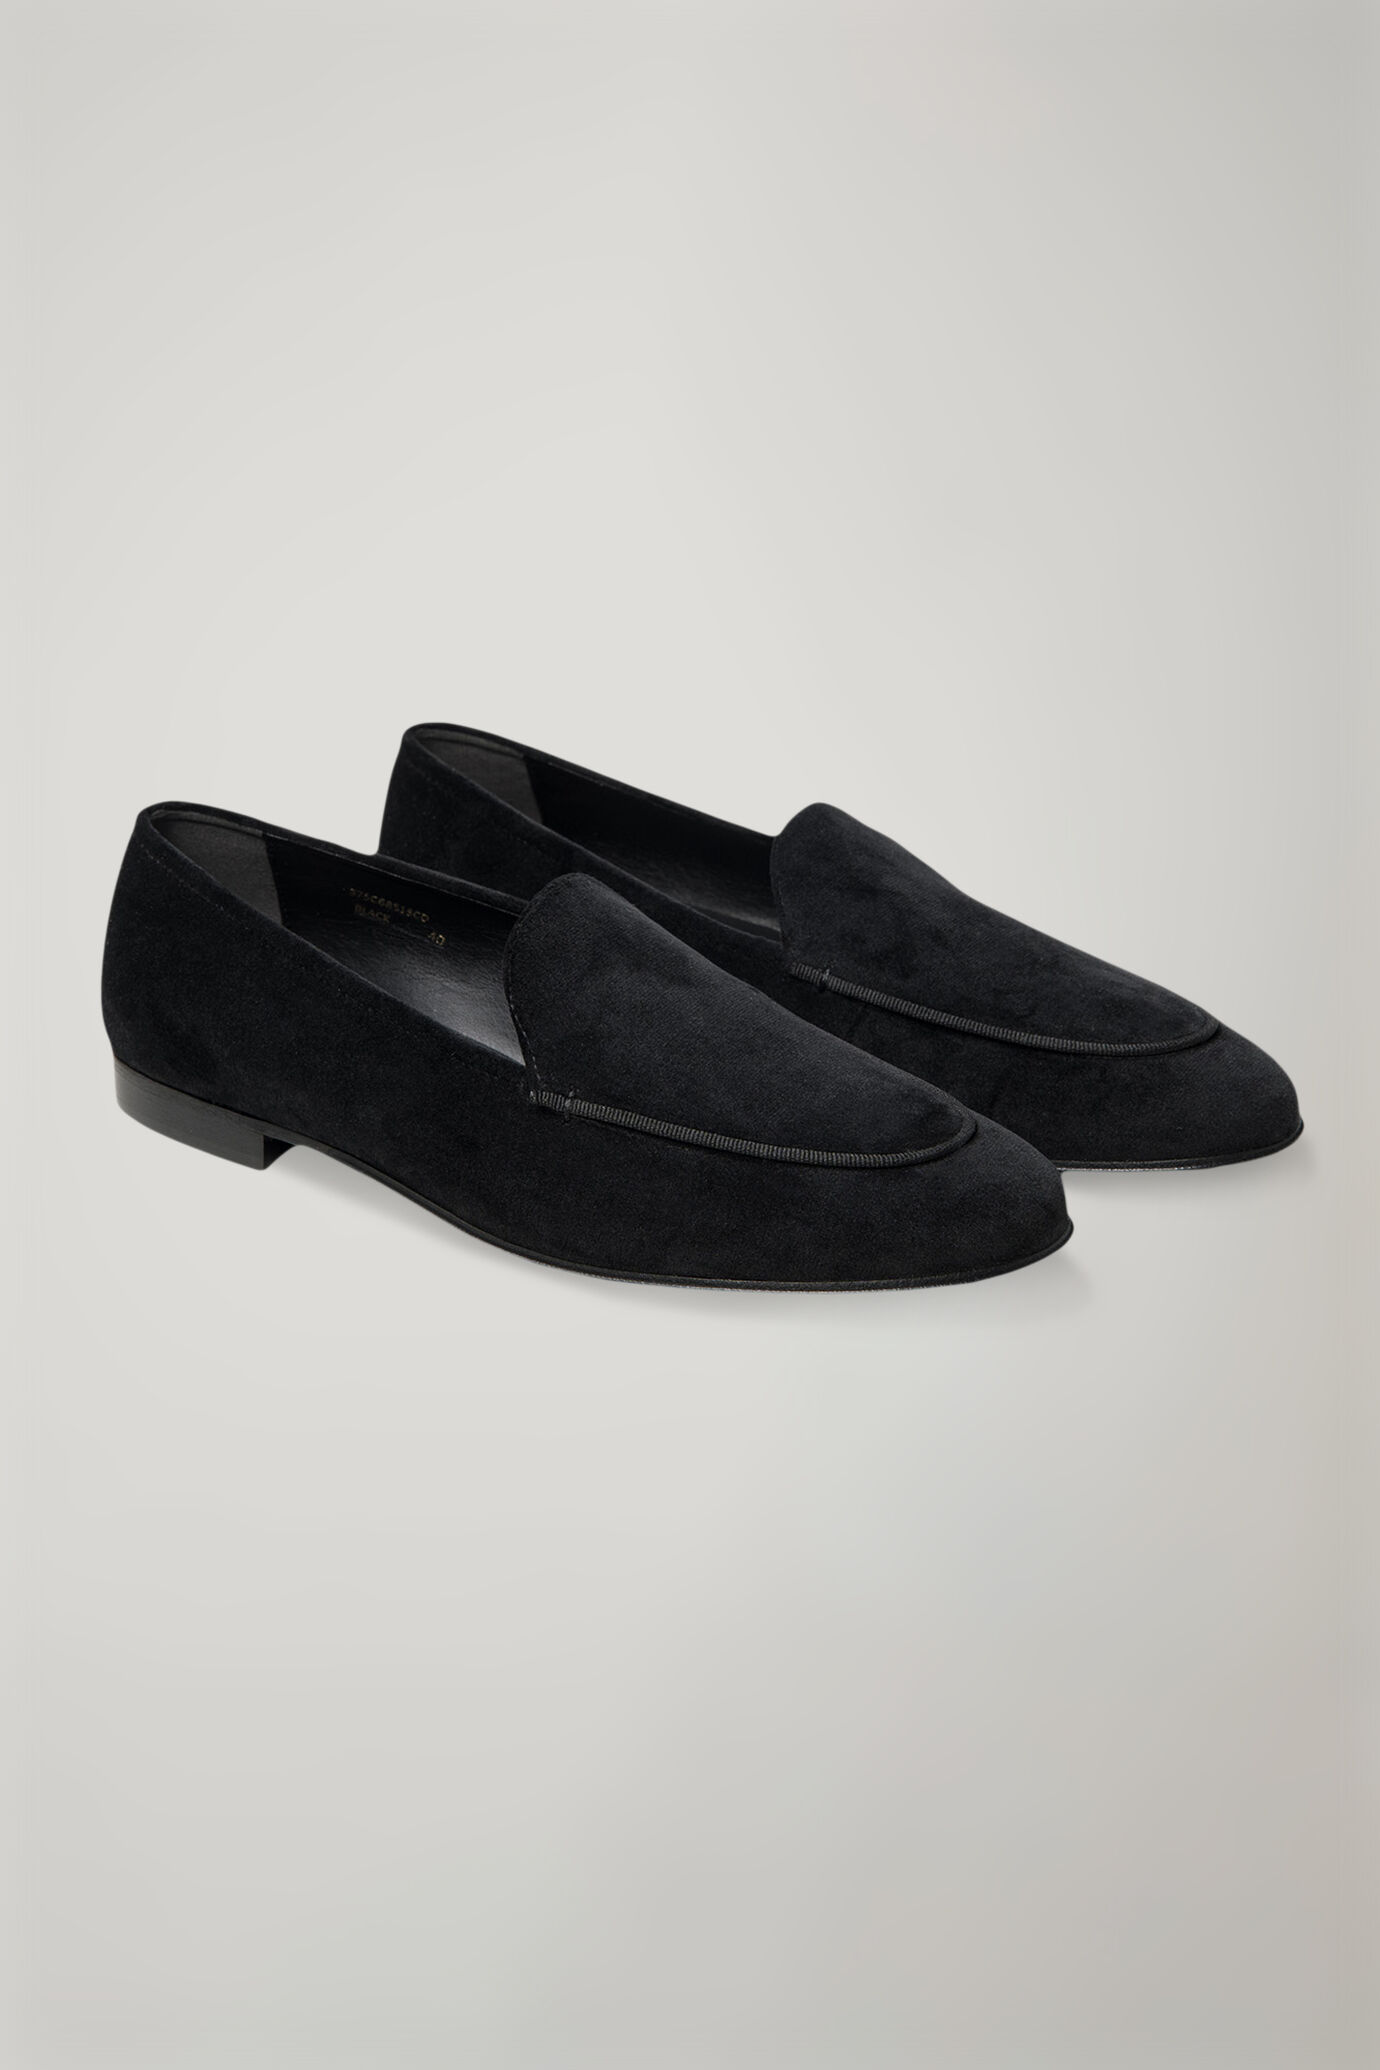 Women's classic velvet loafer with thunit sole